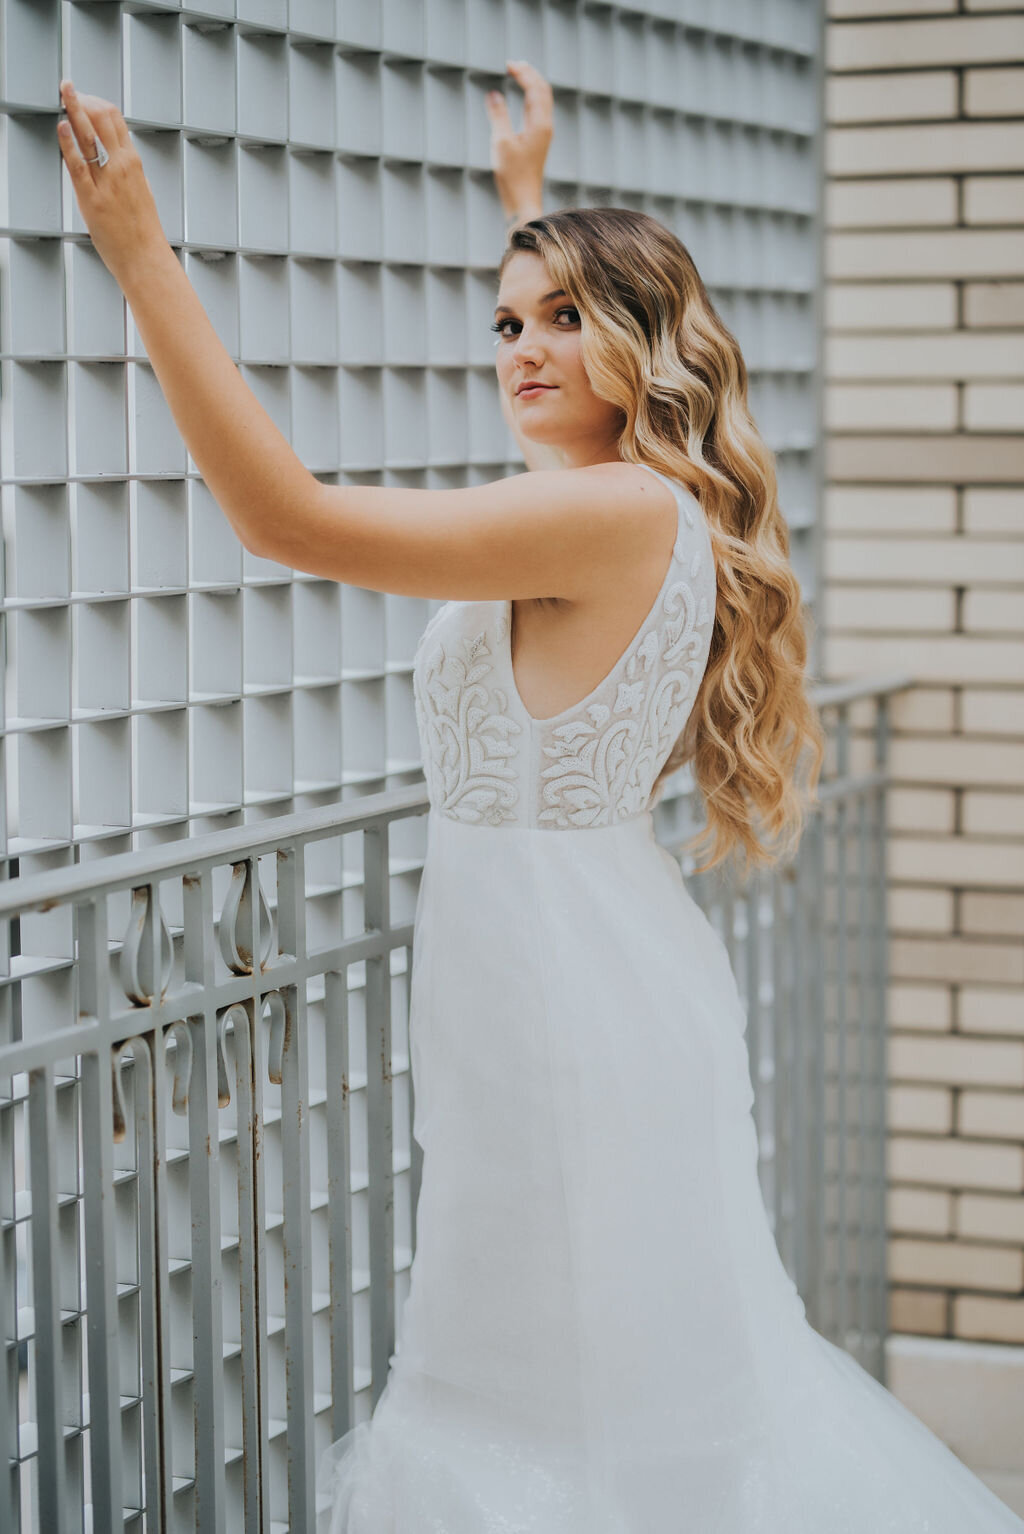 The all-over beaded, sleeveless bodice is paired with a sequin mermaid skirt for a sparkling wedding dress look from top to bottom.